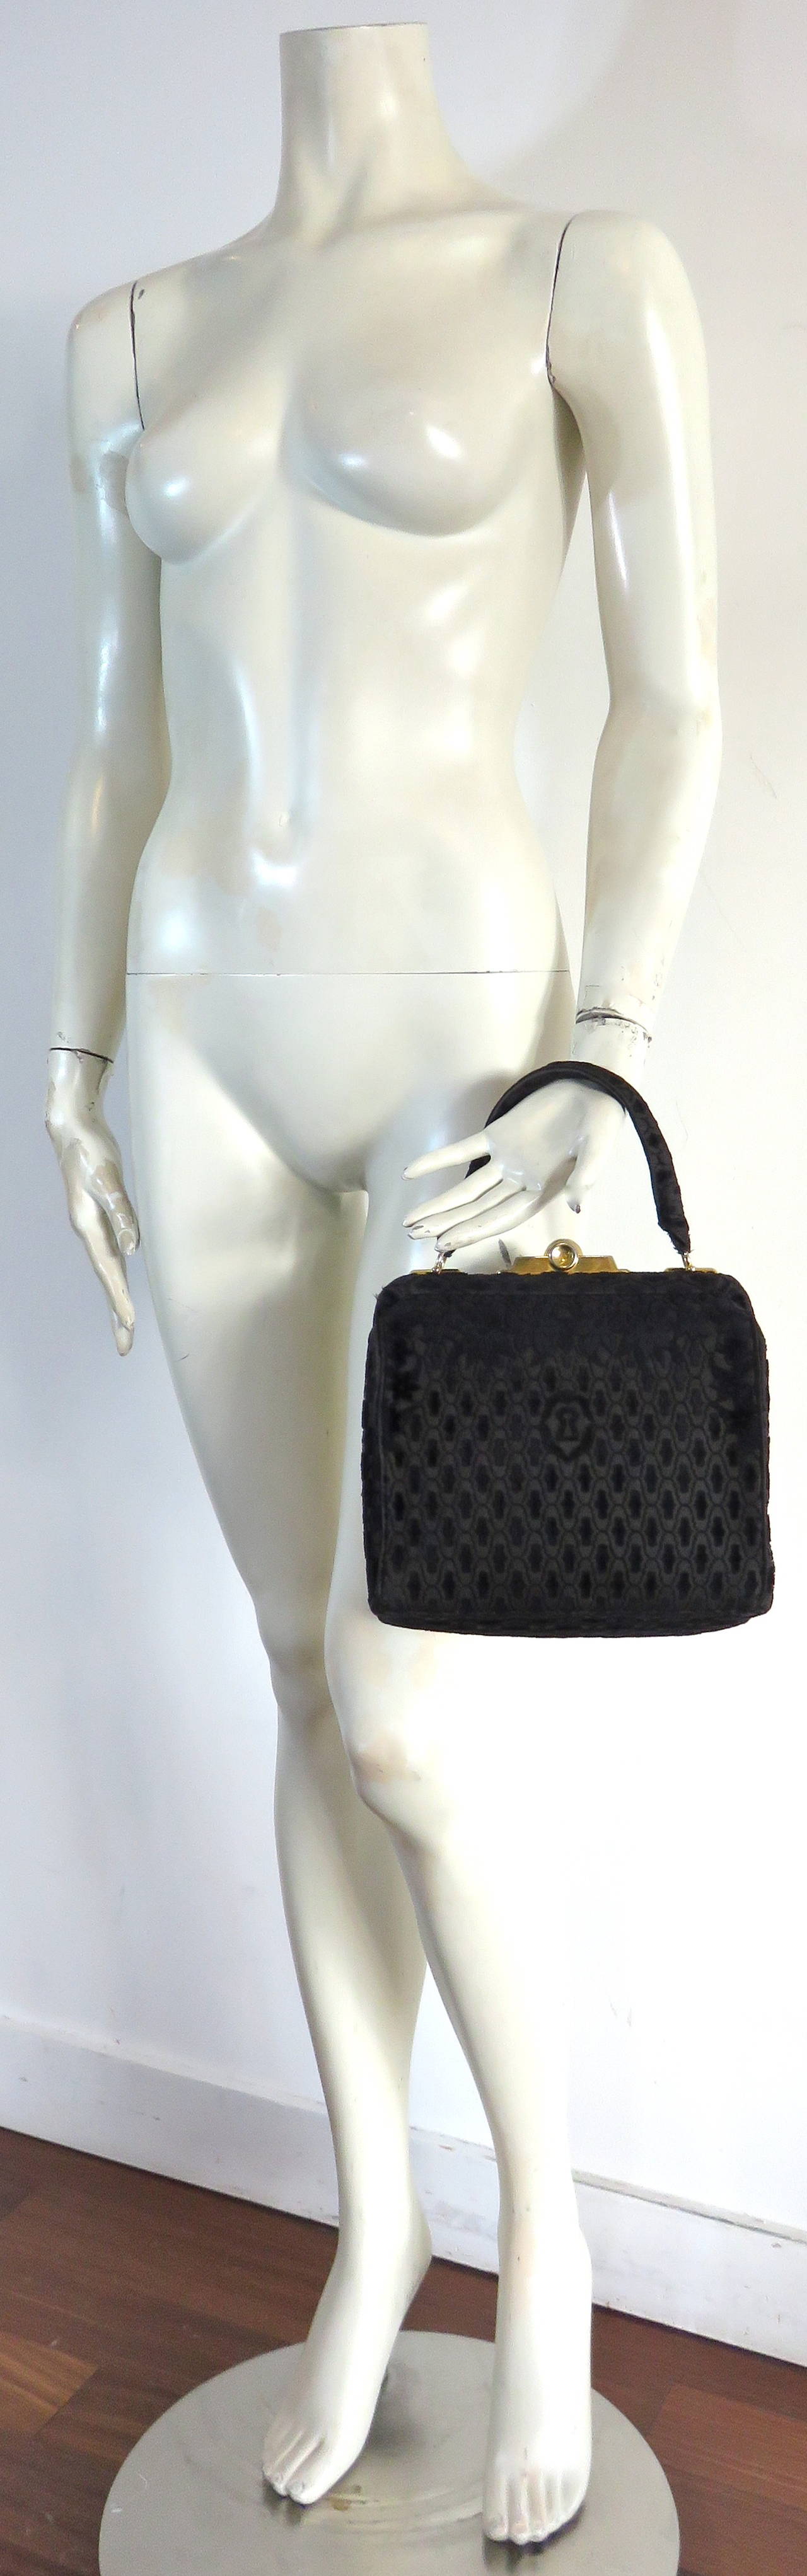 Vintage, 1970's ROBERTA DI CAMERINO Black, cut velvet, box purse featuring florals at the top edges, and trompe-l'œil, key hole design at center-front, and back.  The base pattern of the bag is an all-over oval lace design.

The bag features,